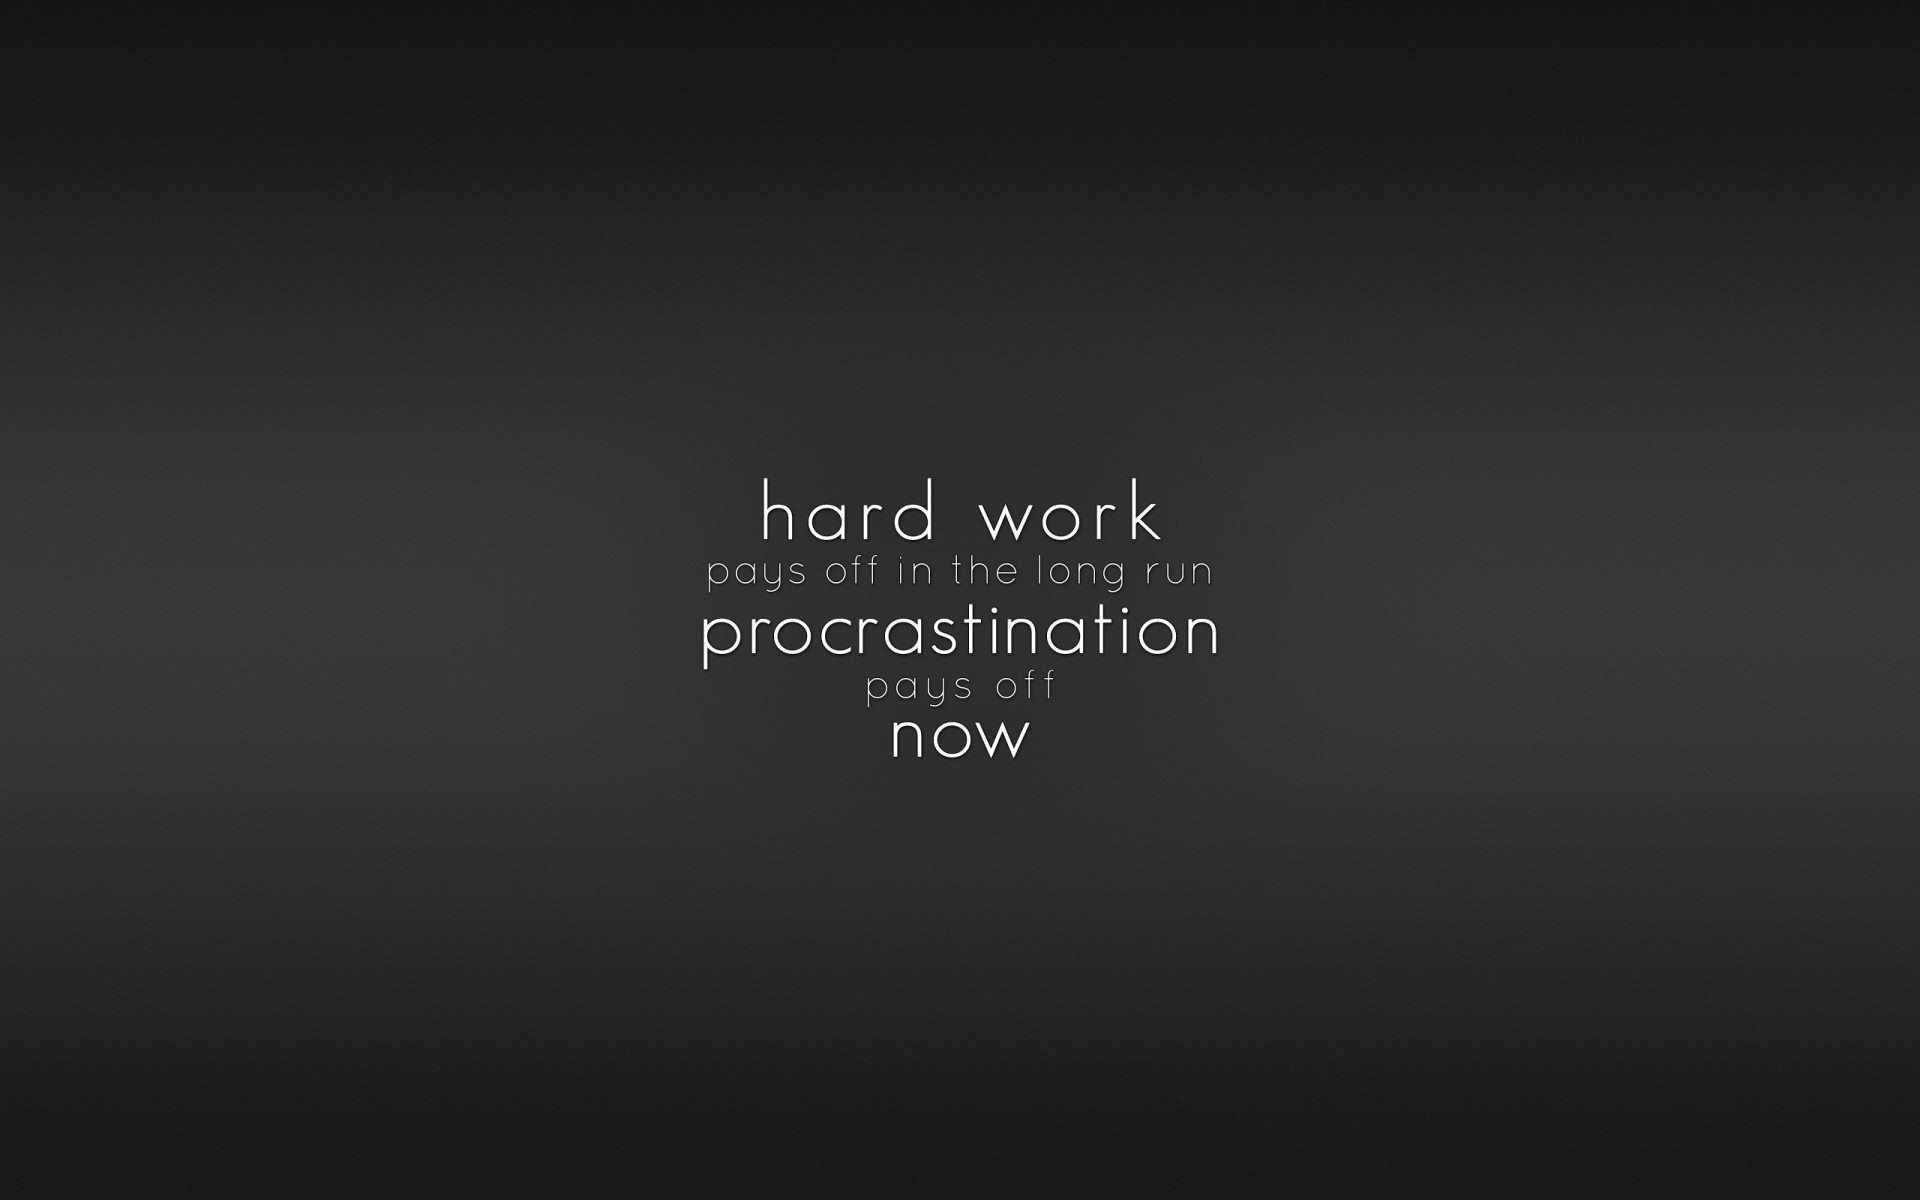 Work Harder Wallpapers